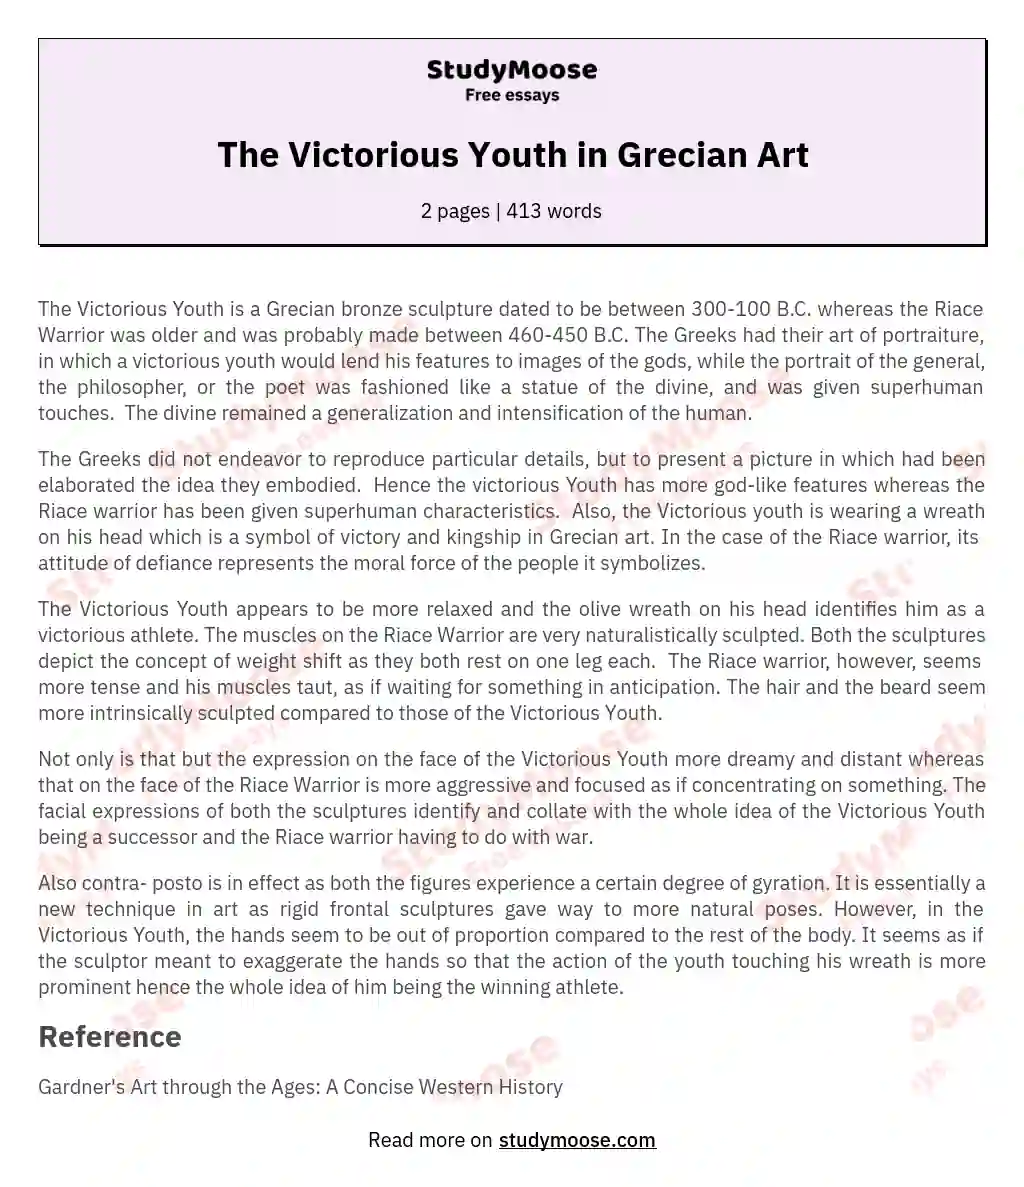 The Victorious Youth in Grecian Art essay